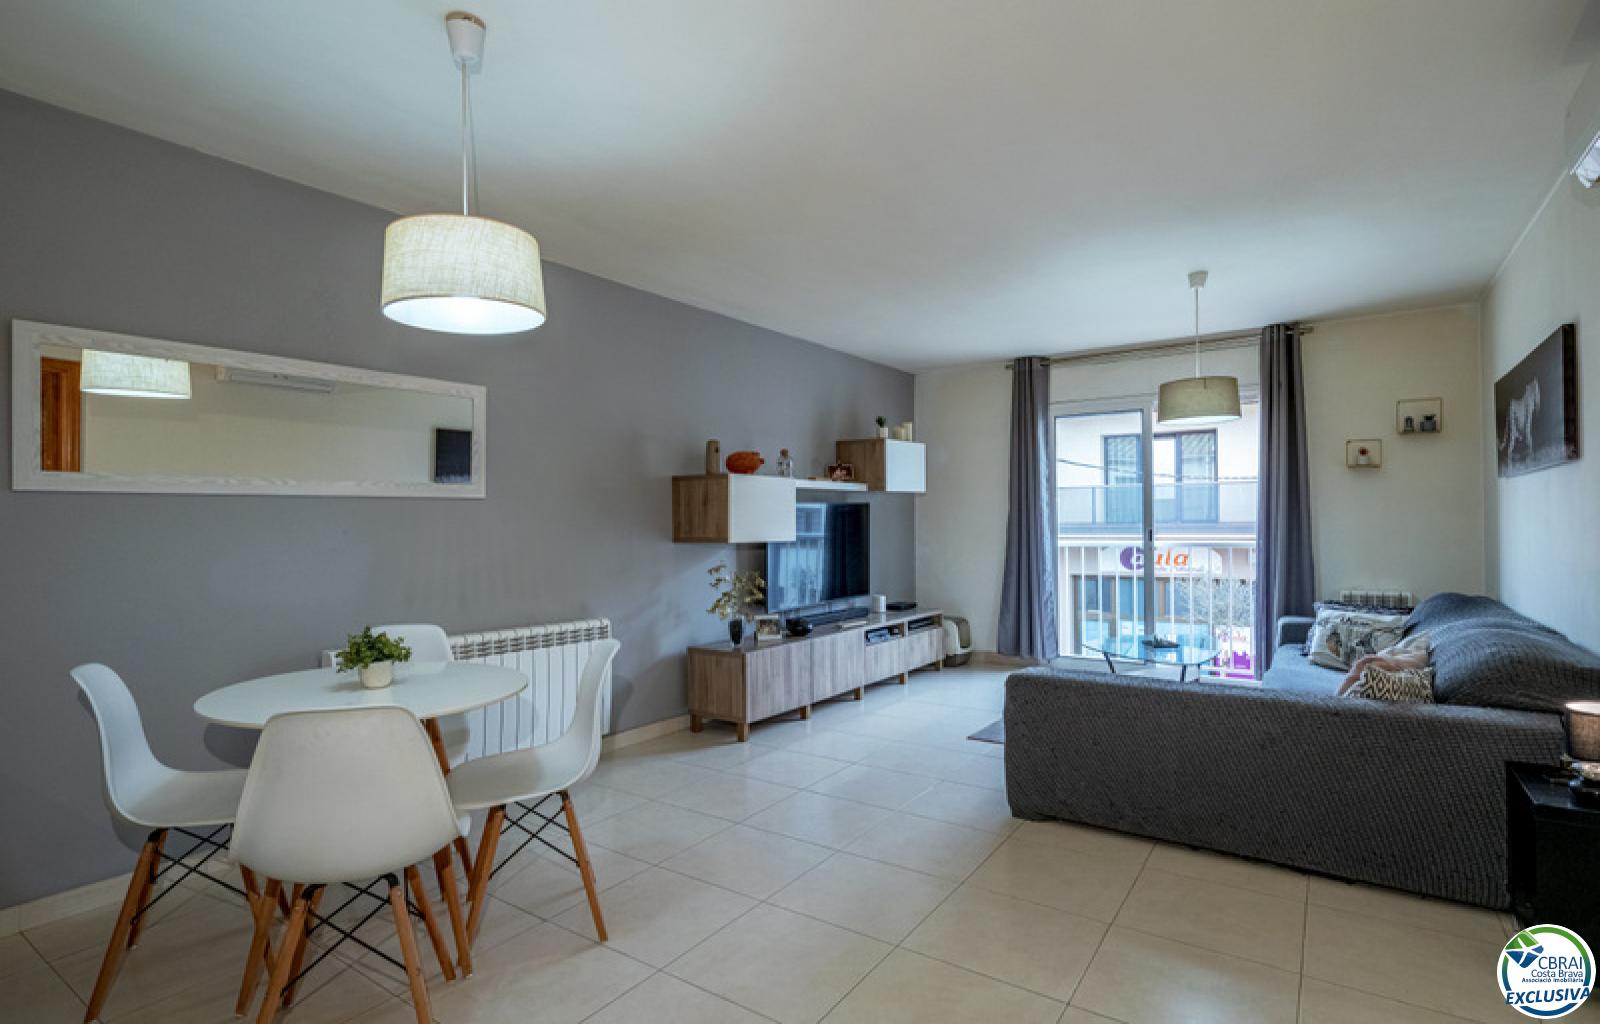 Beautiful two bedroom apartment in the city center in Sant Pere Pescador